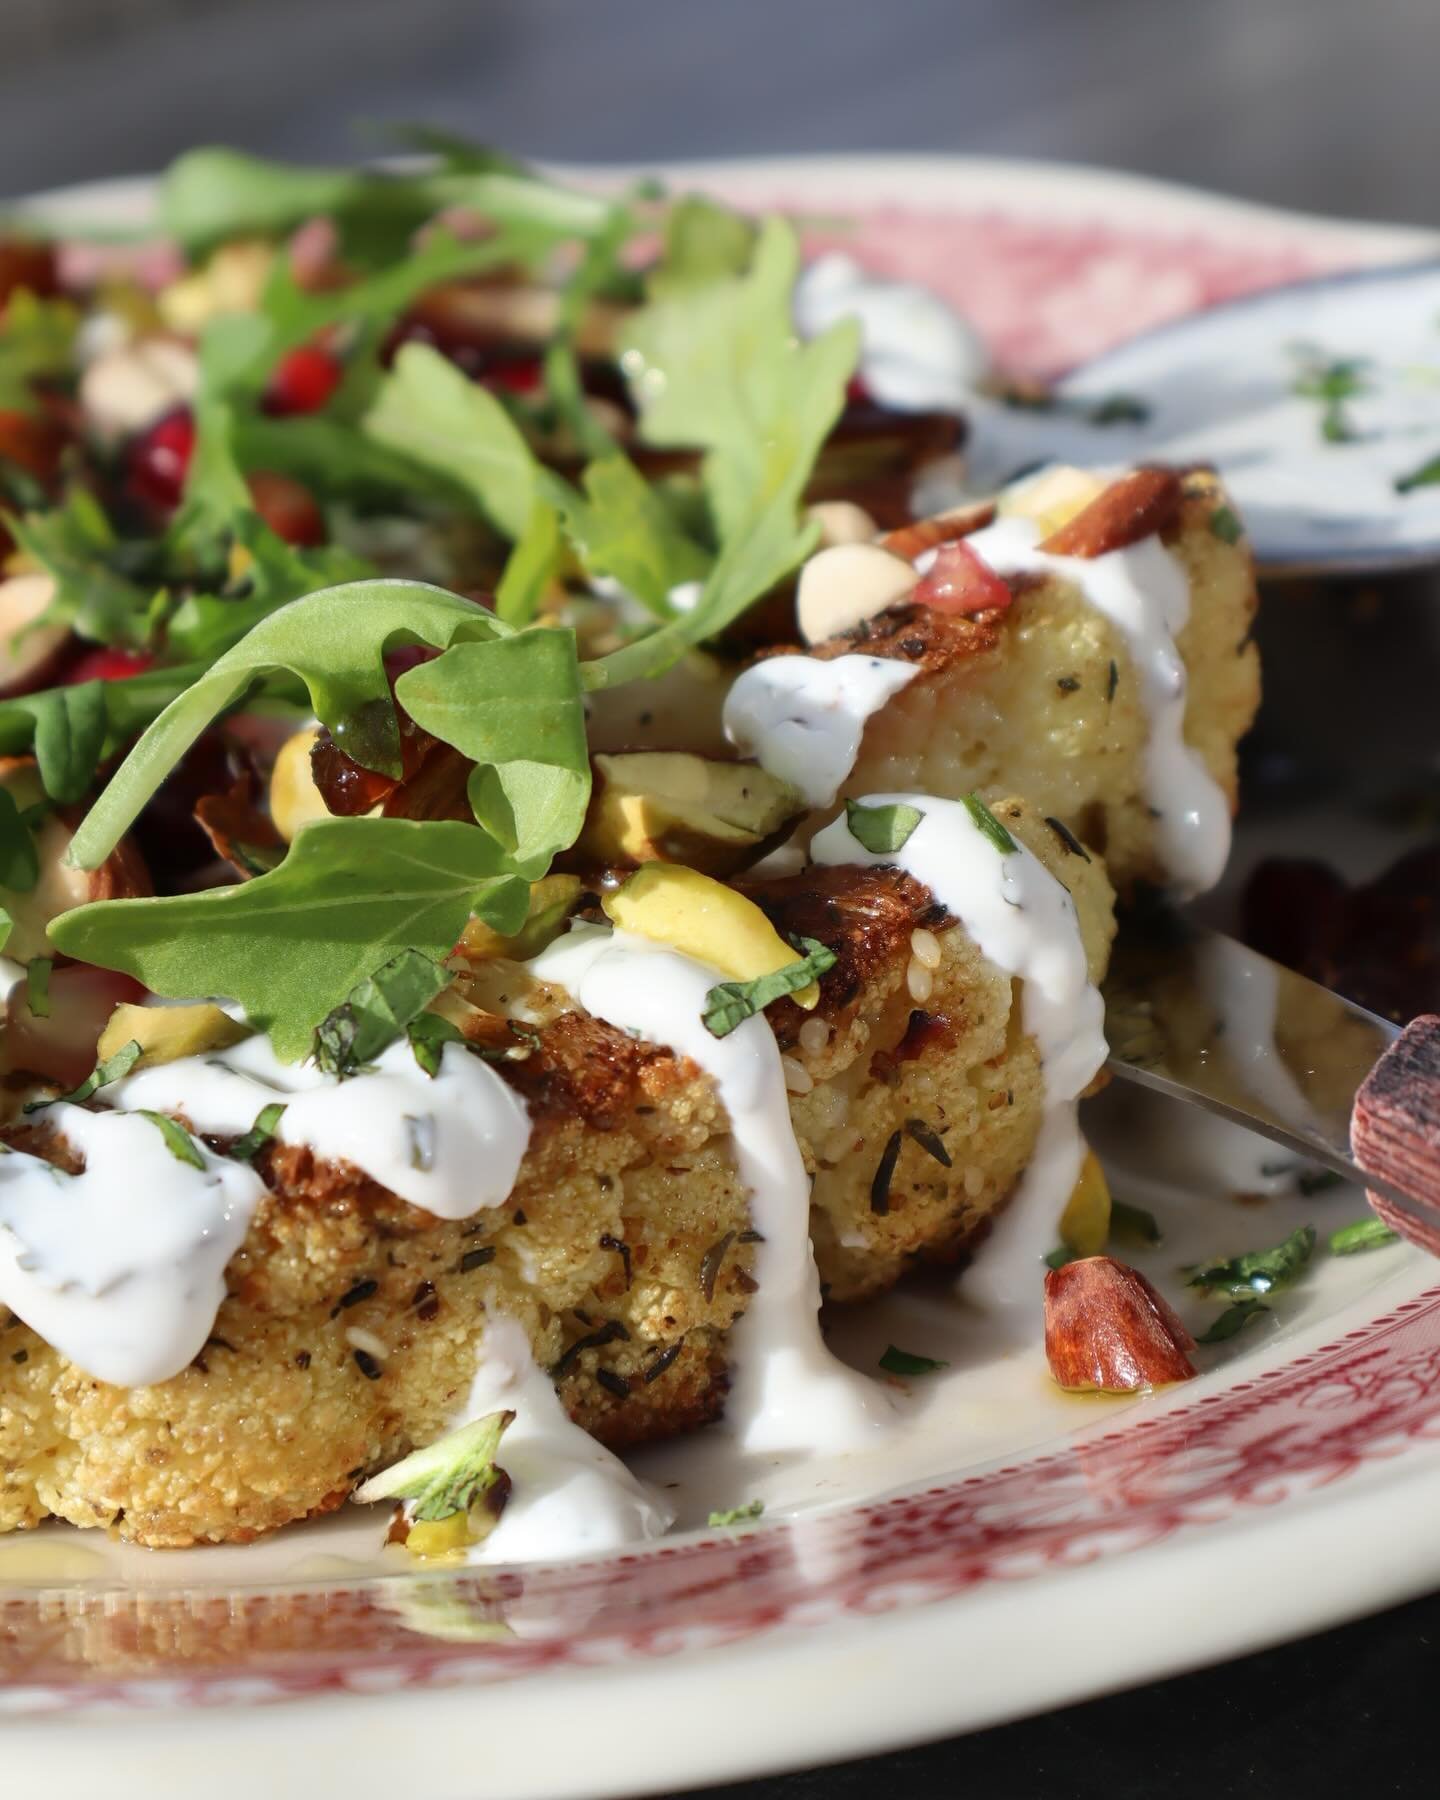 Have you tried our Cauliflower Steak? Topped with za&rsquo;atar, pomegranate, pistachio, almond, dates, arugula and served with a basil-mint yogurt. 

___________________________________
#thewhalechicago #chicagofoodie #chicagorestaurants #chicago